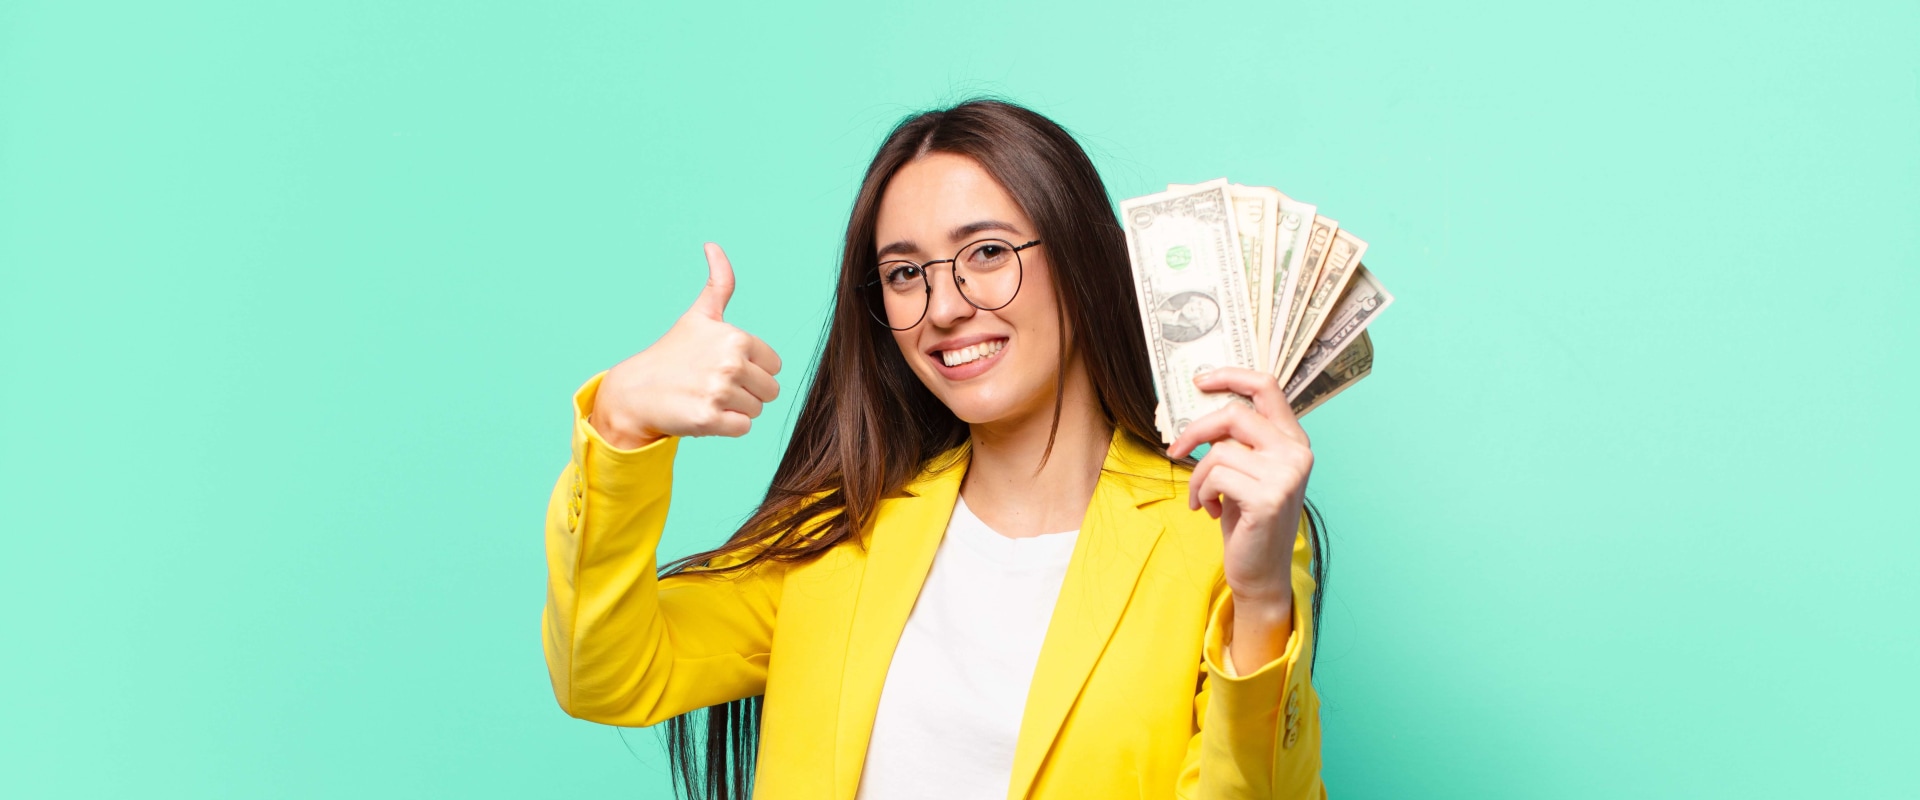 Getting a Payday Loan When You're Unemployed